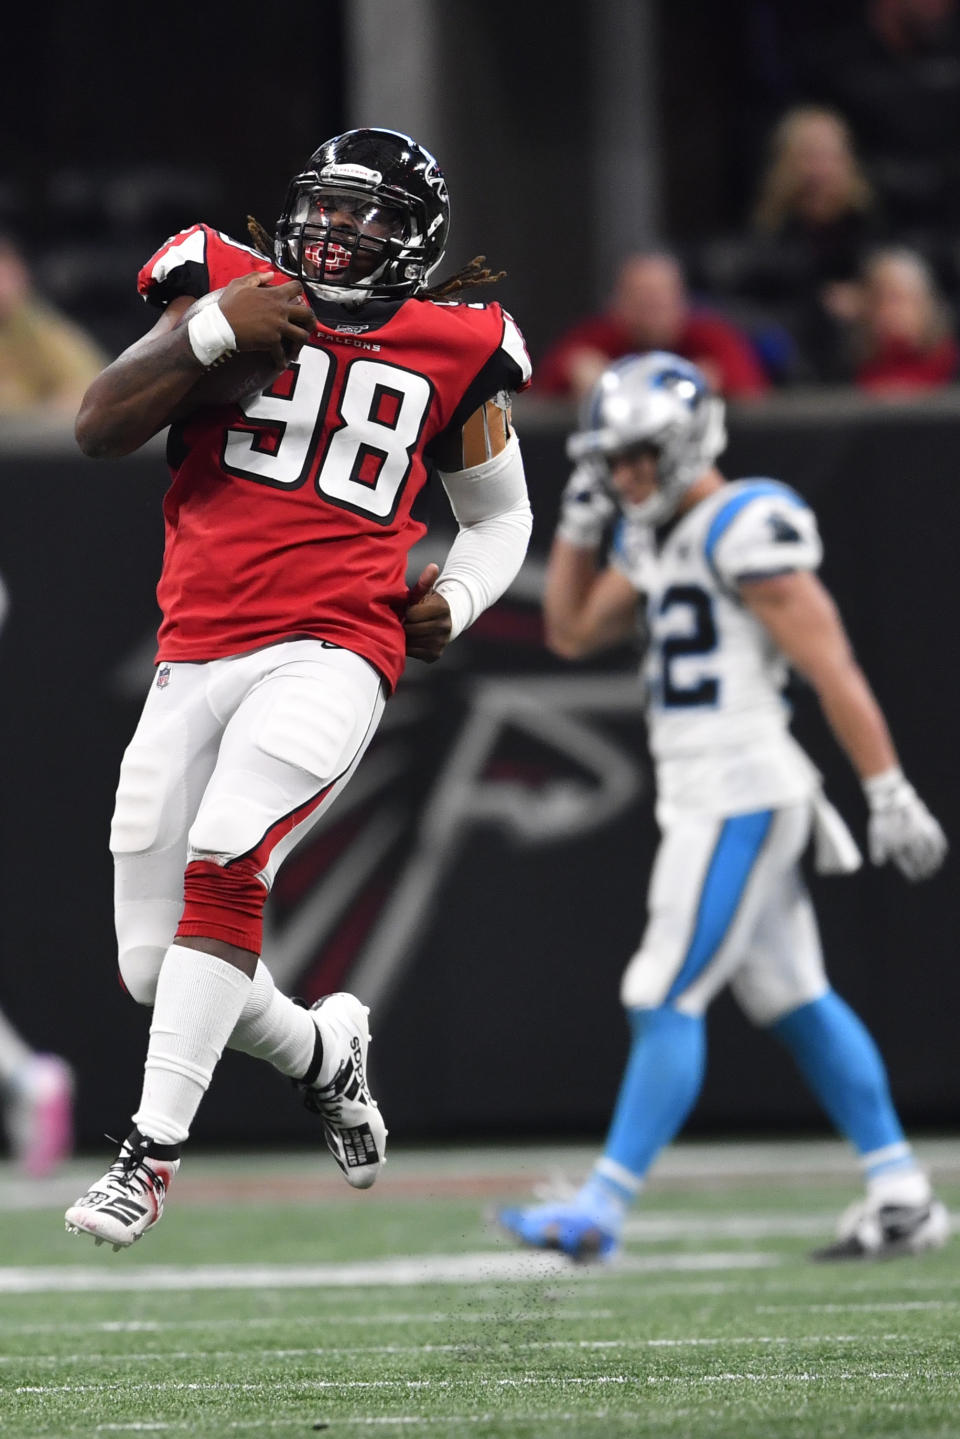 Atlanta Falcons defensive end Takkarist McKinley (98) celebrates on a defensive play against the Carolina Panthers during the second half of an NFL football game, Sunday, Dec. 8, 2019, in Atlanta. (AP Photo/John Amis)